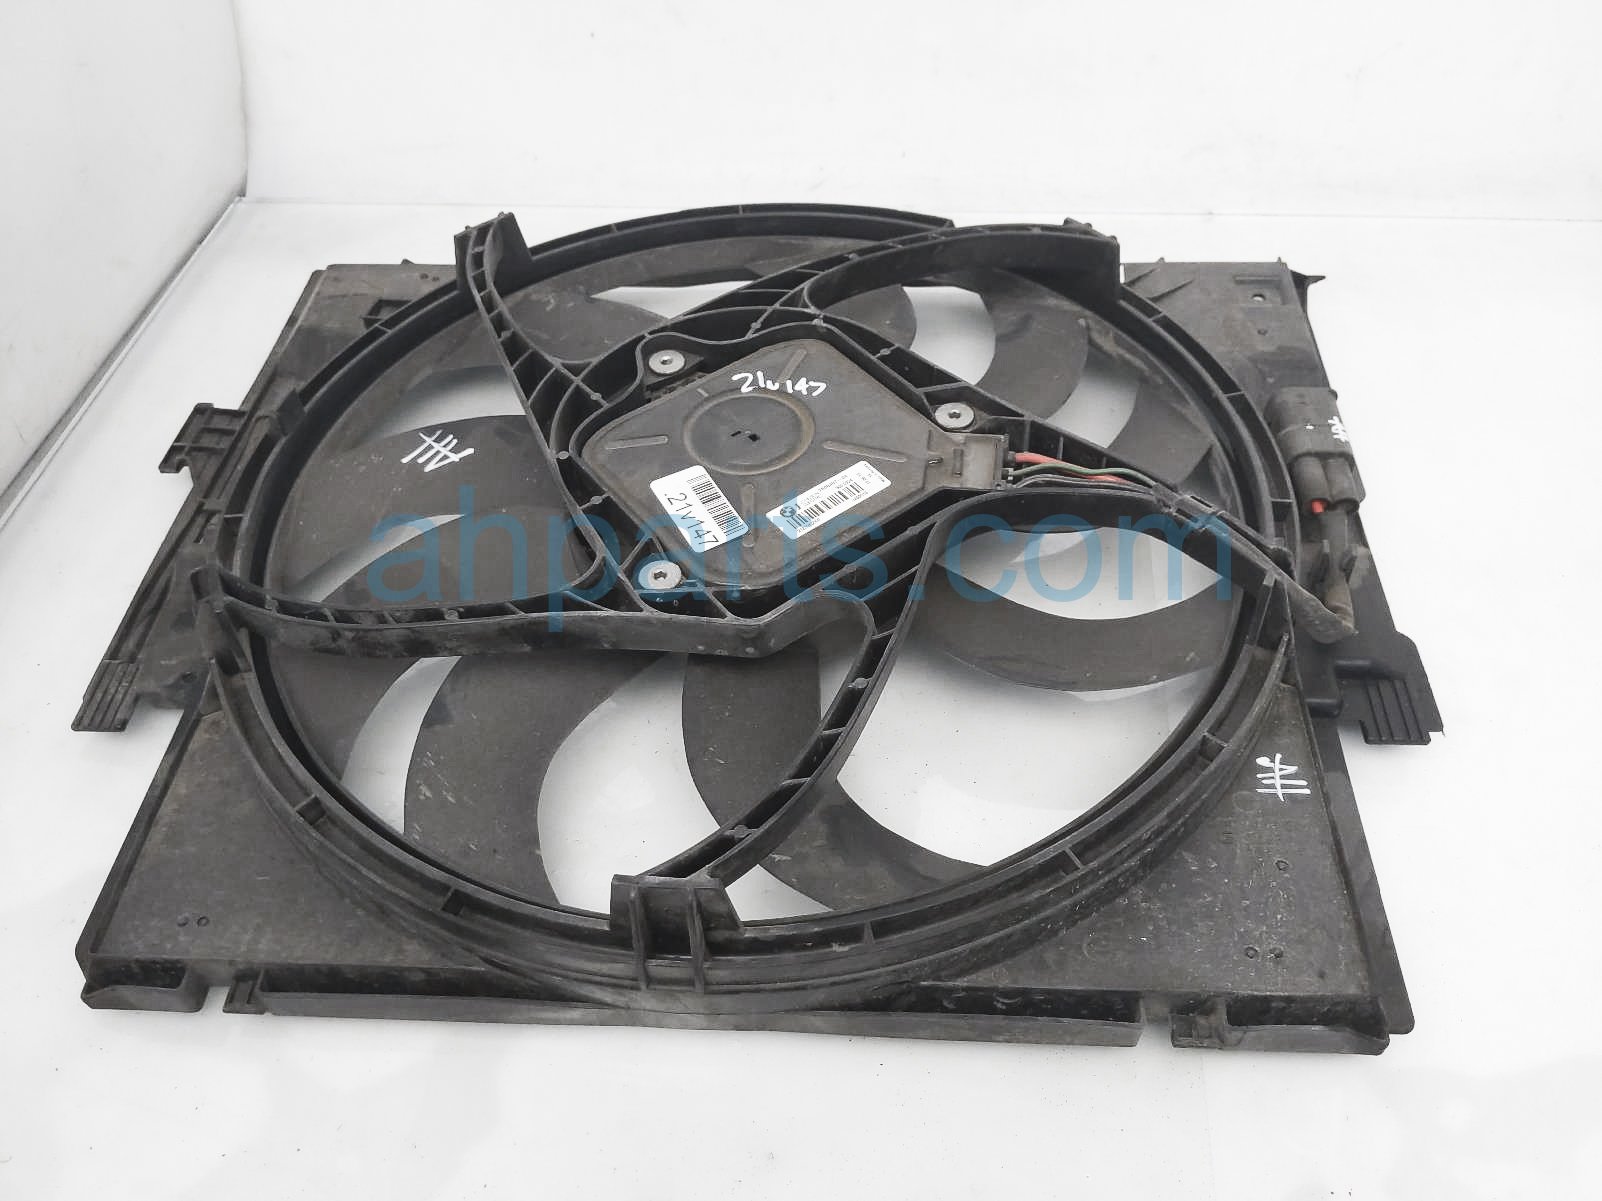 $100 BMW RADIATOR COOLING FAN ASSEMBLY